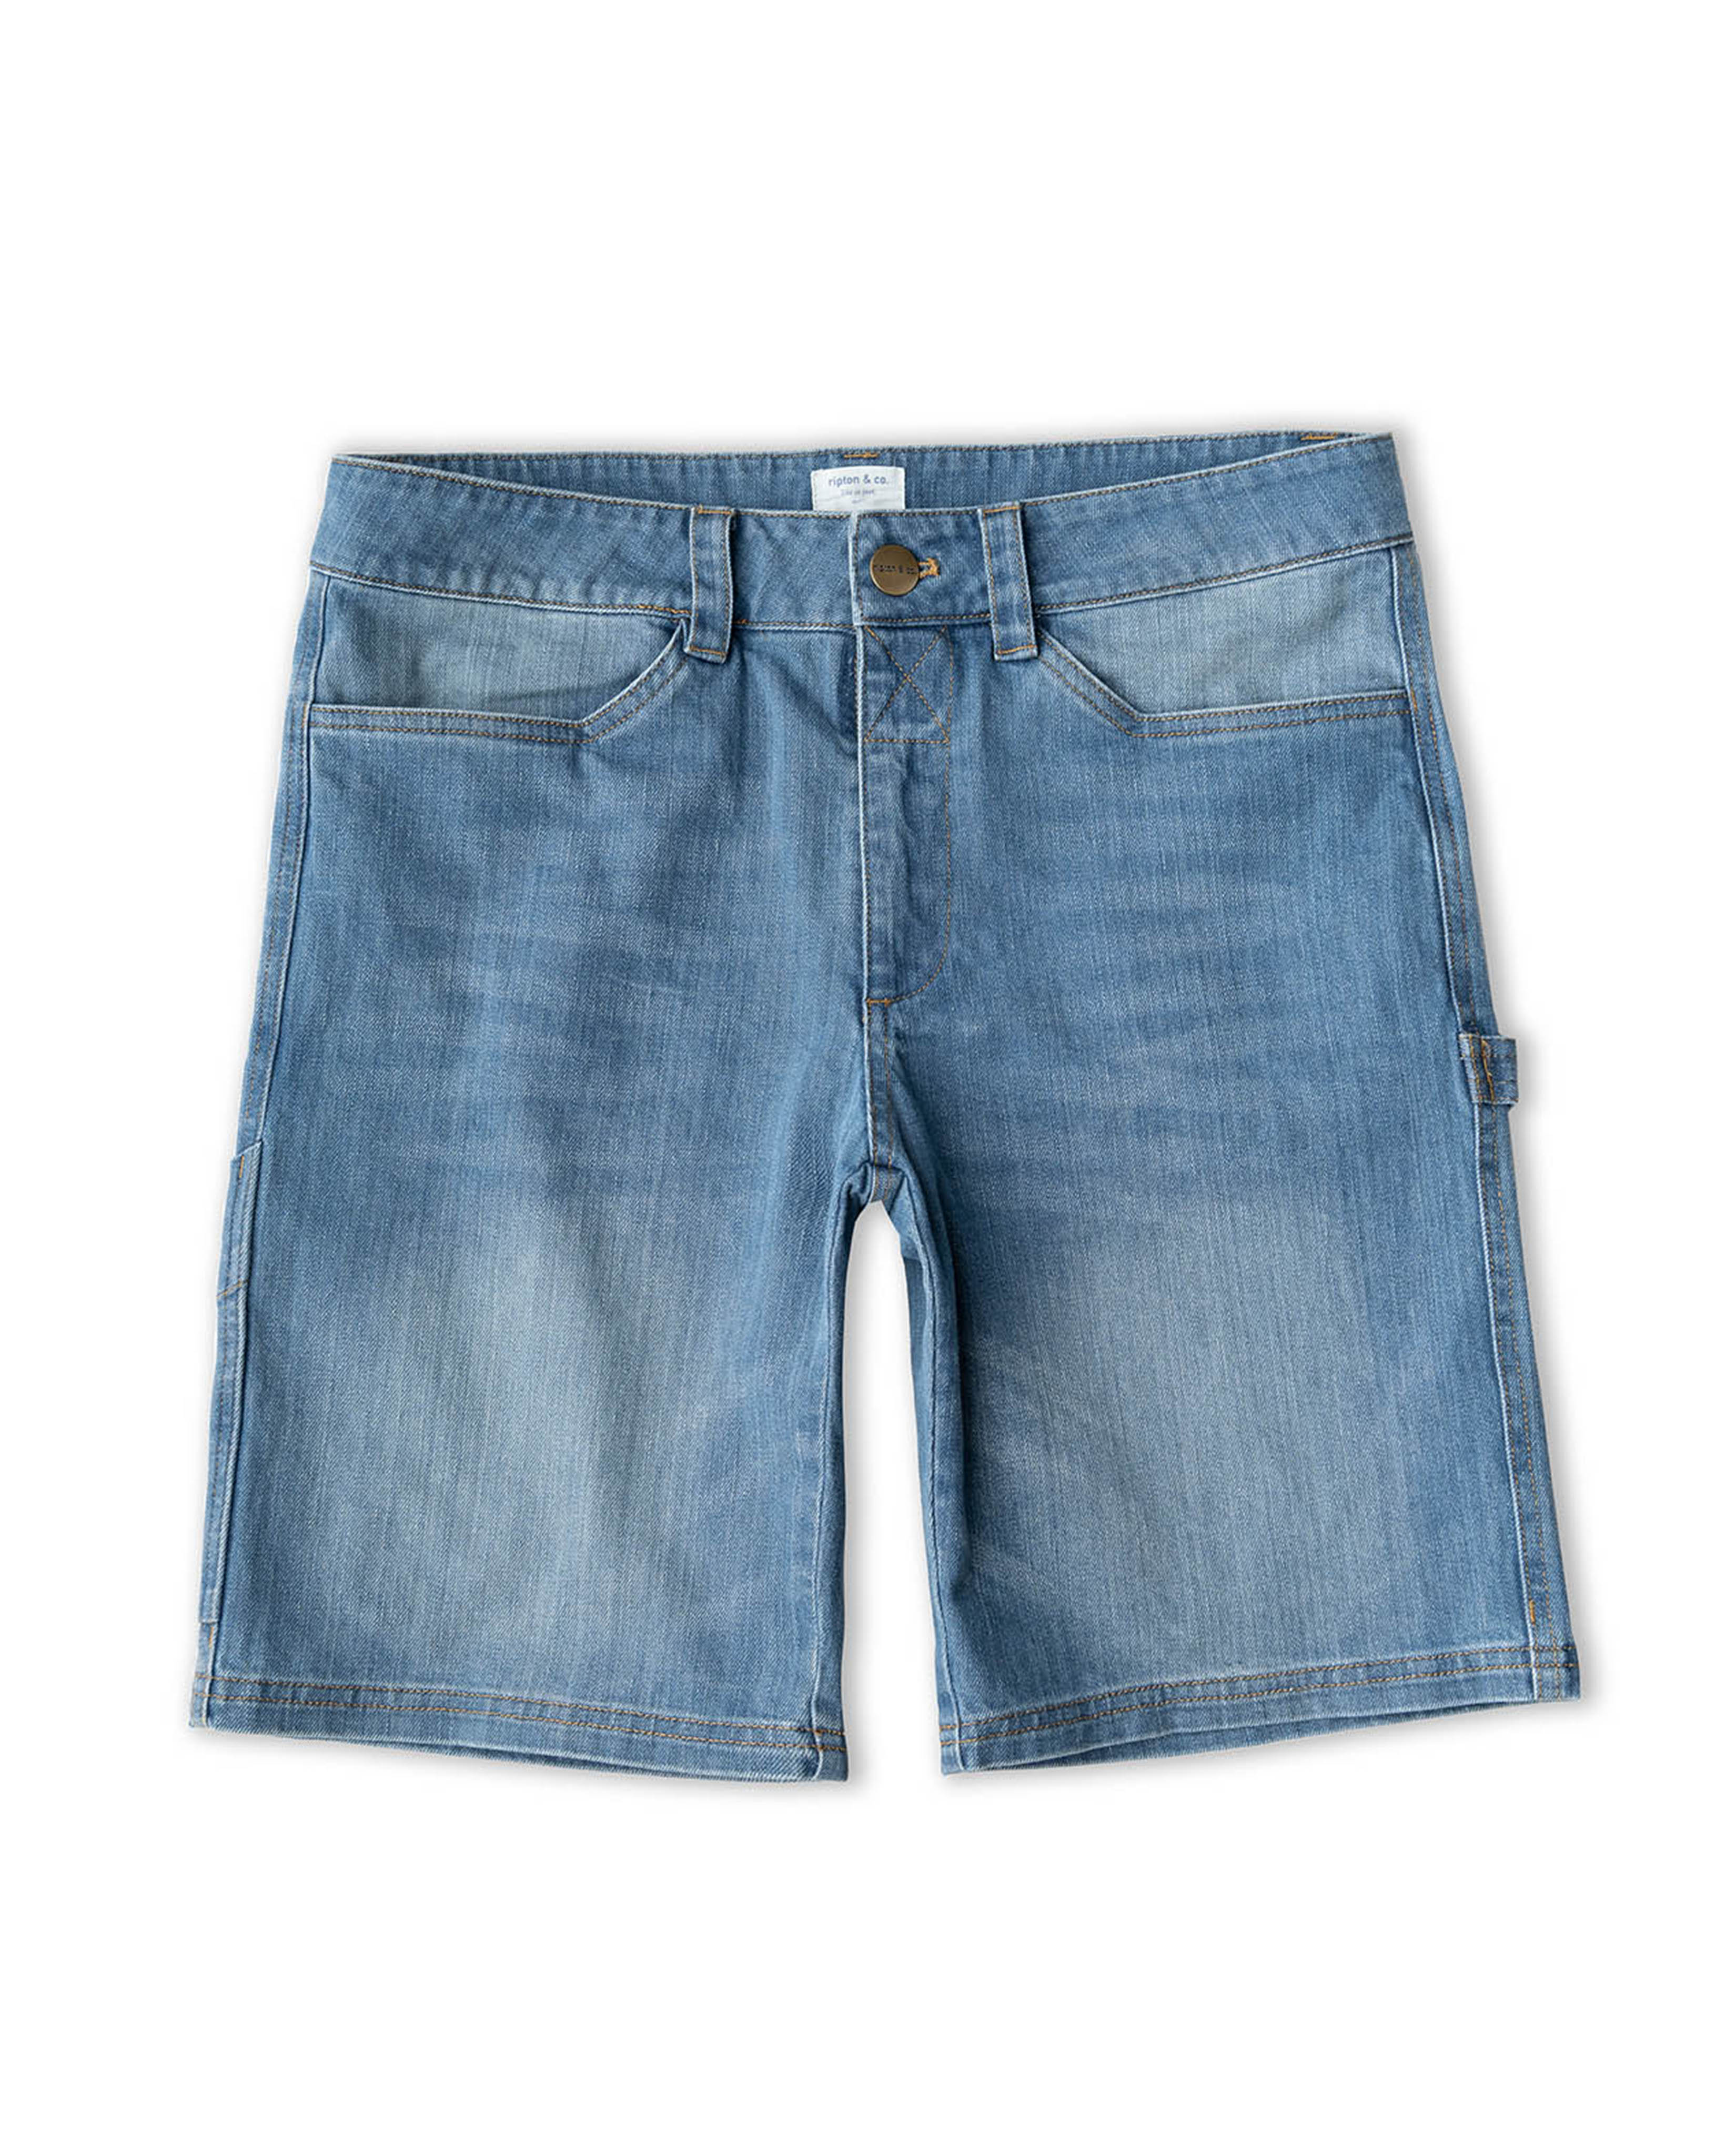 The Case for Jorts (Yes, Really)